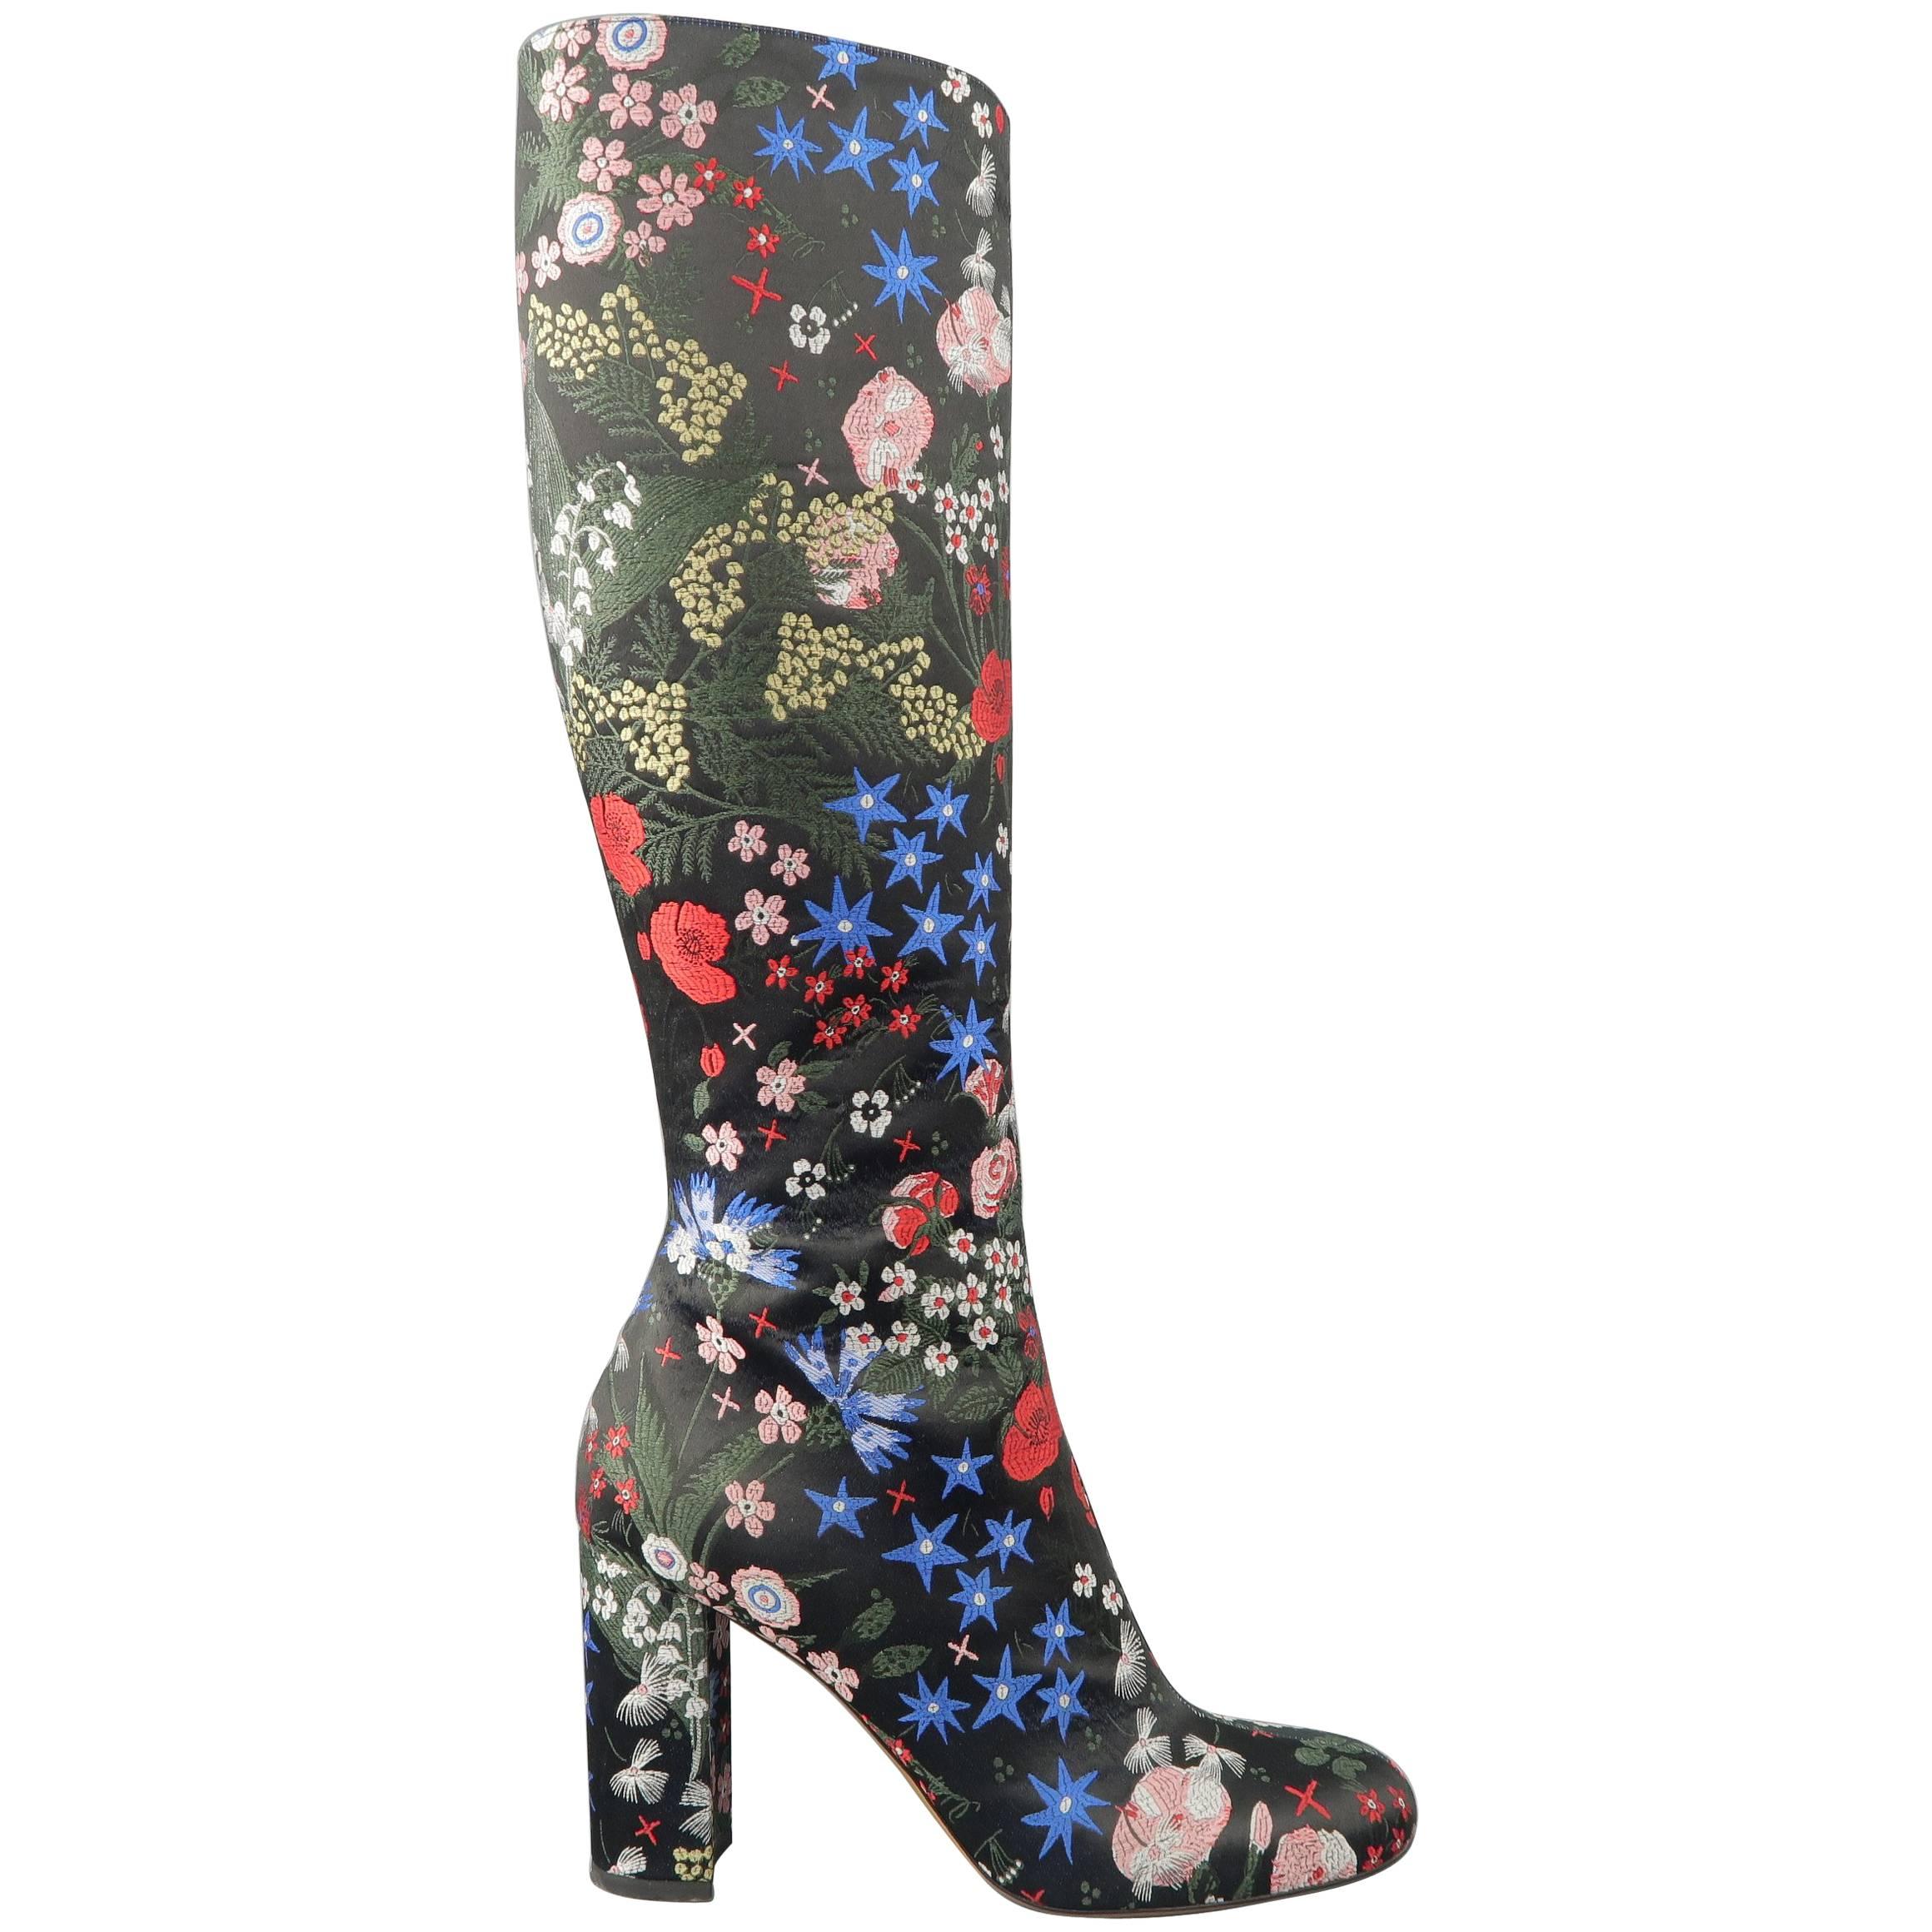 Valentino Boots - Pre-Fall 2015 Runway - Black MultiColor Floral Satin Knee High